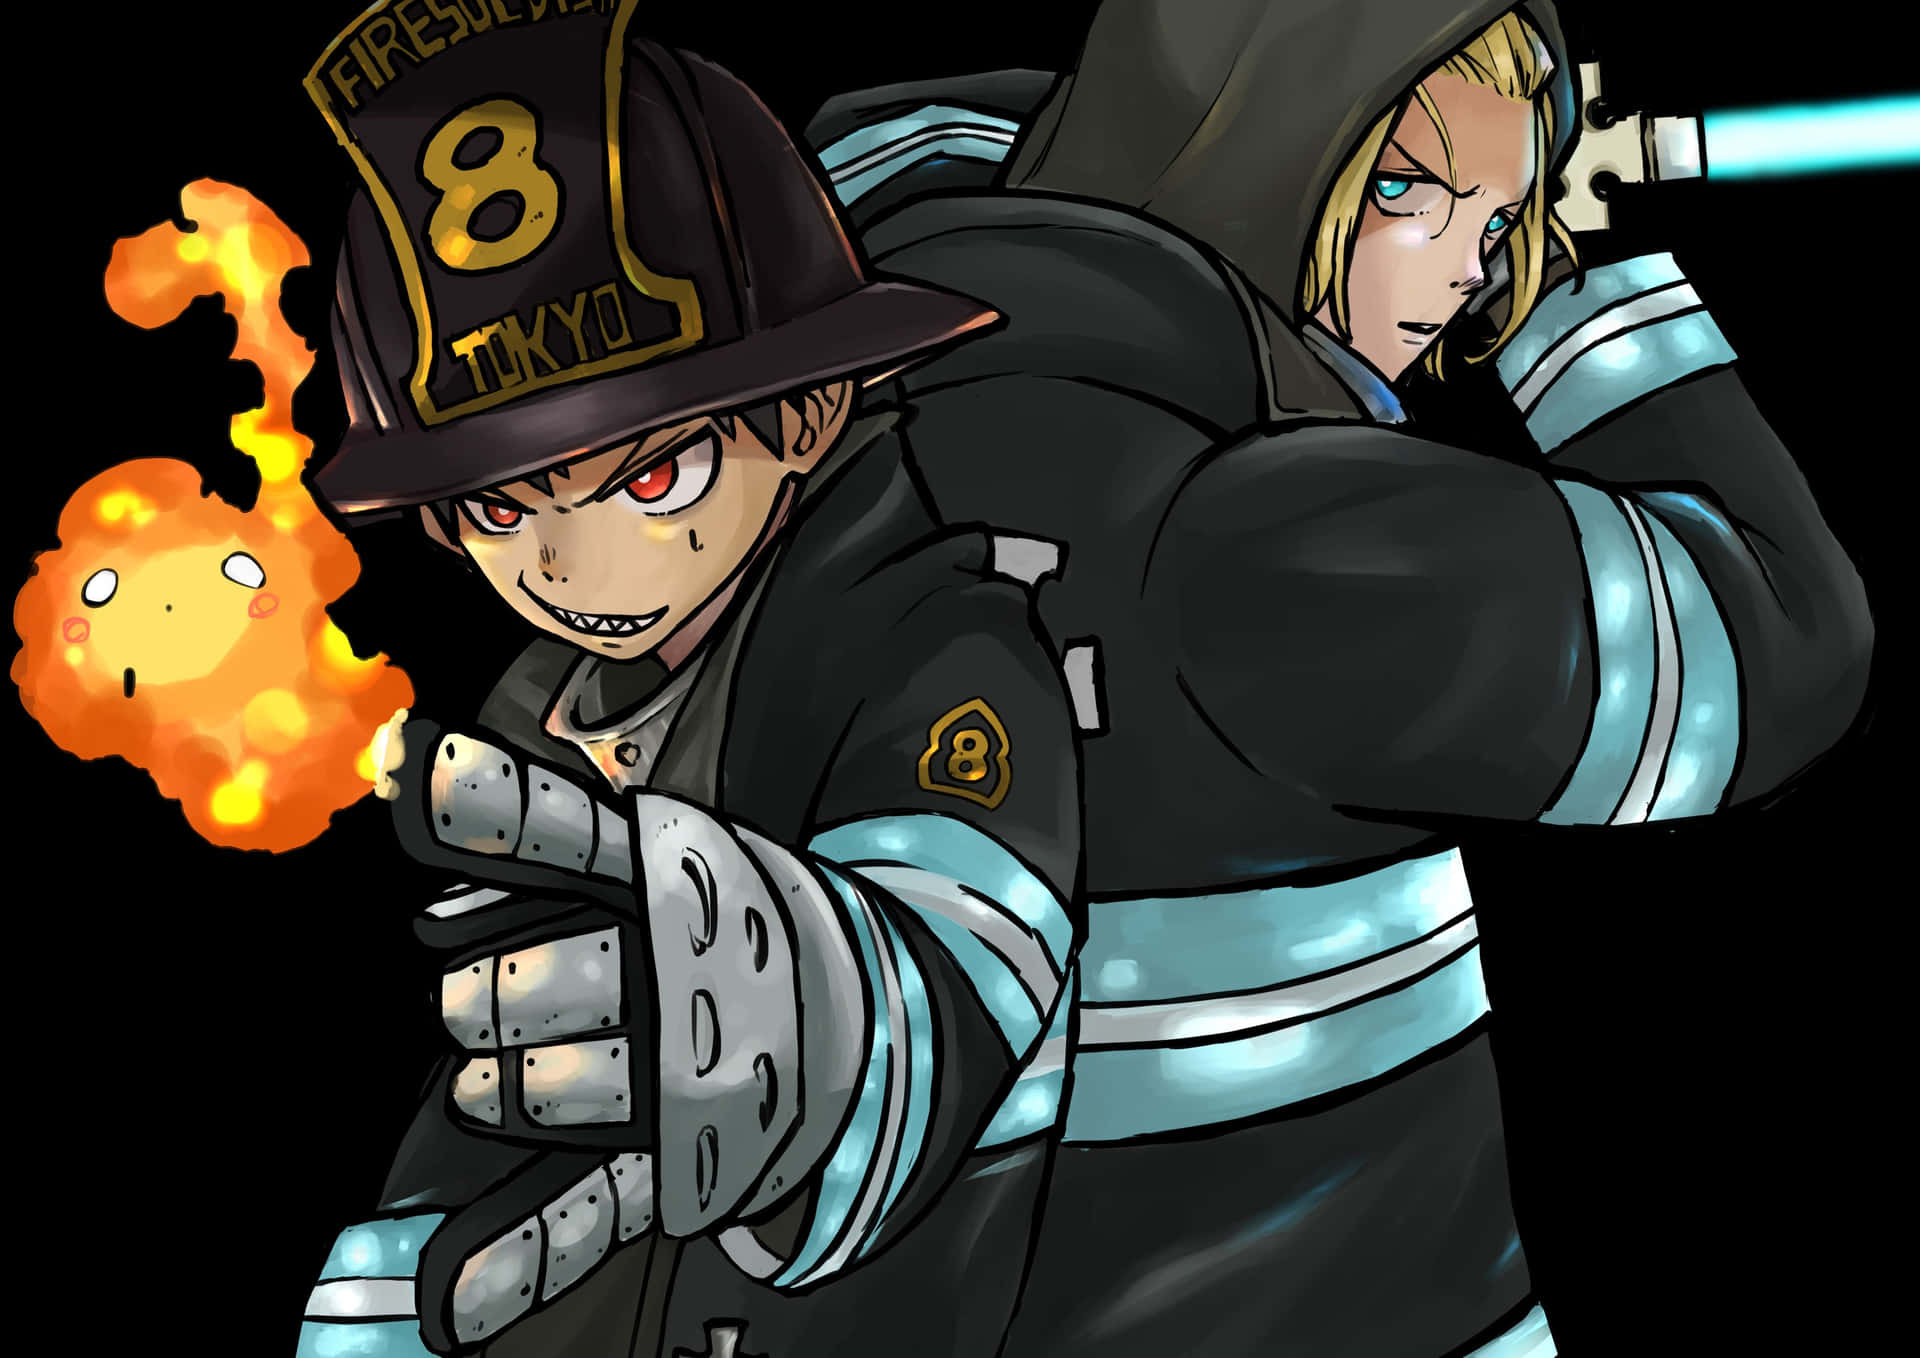 “A thrilling view of the Fire Force”